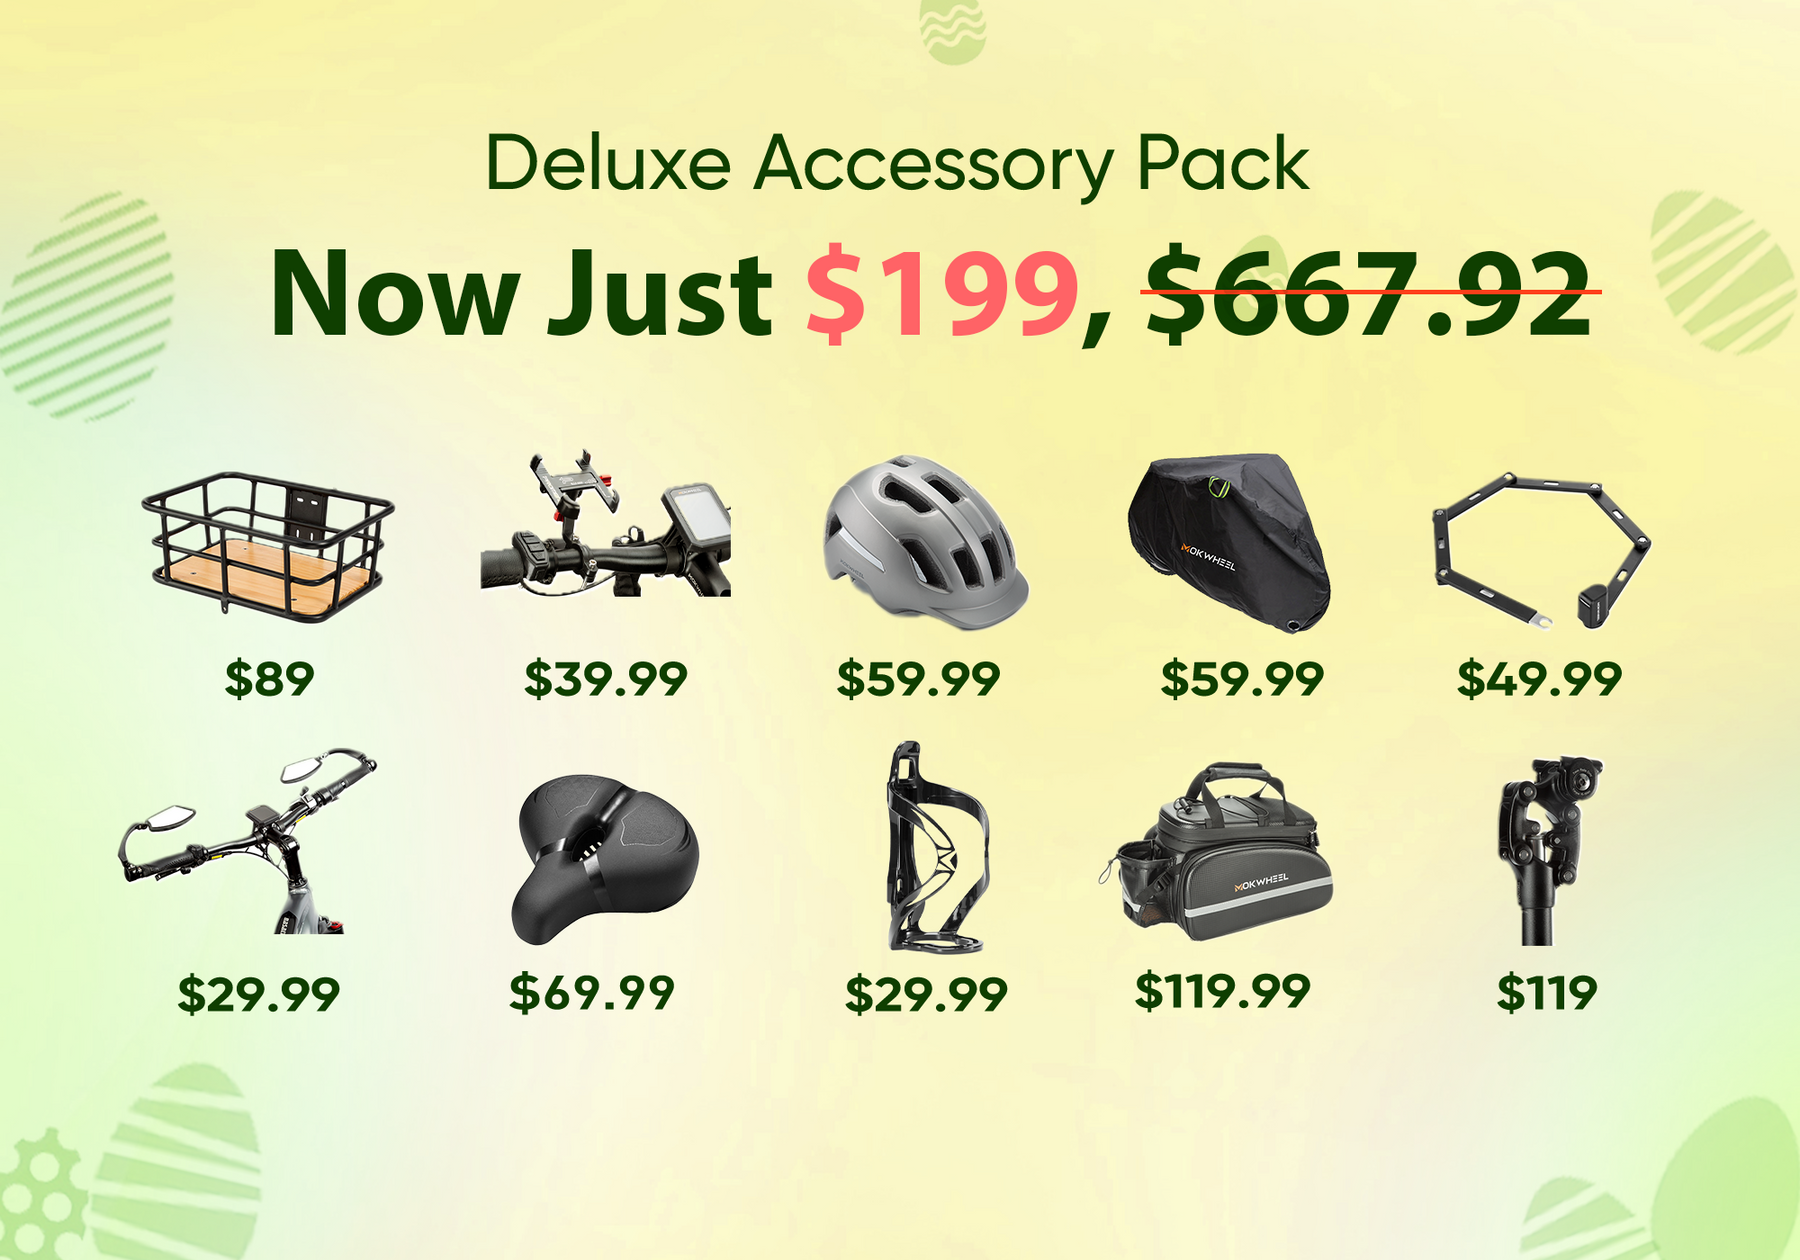 Deluxe Accessory Pack